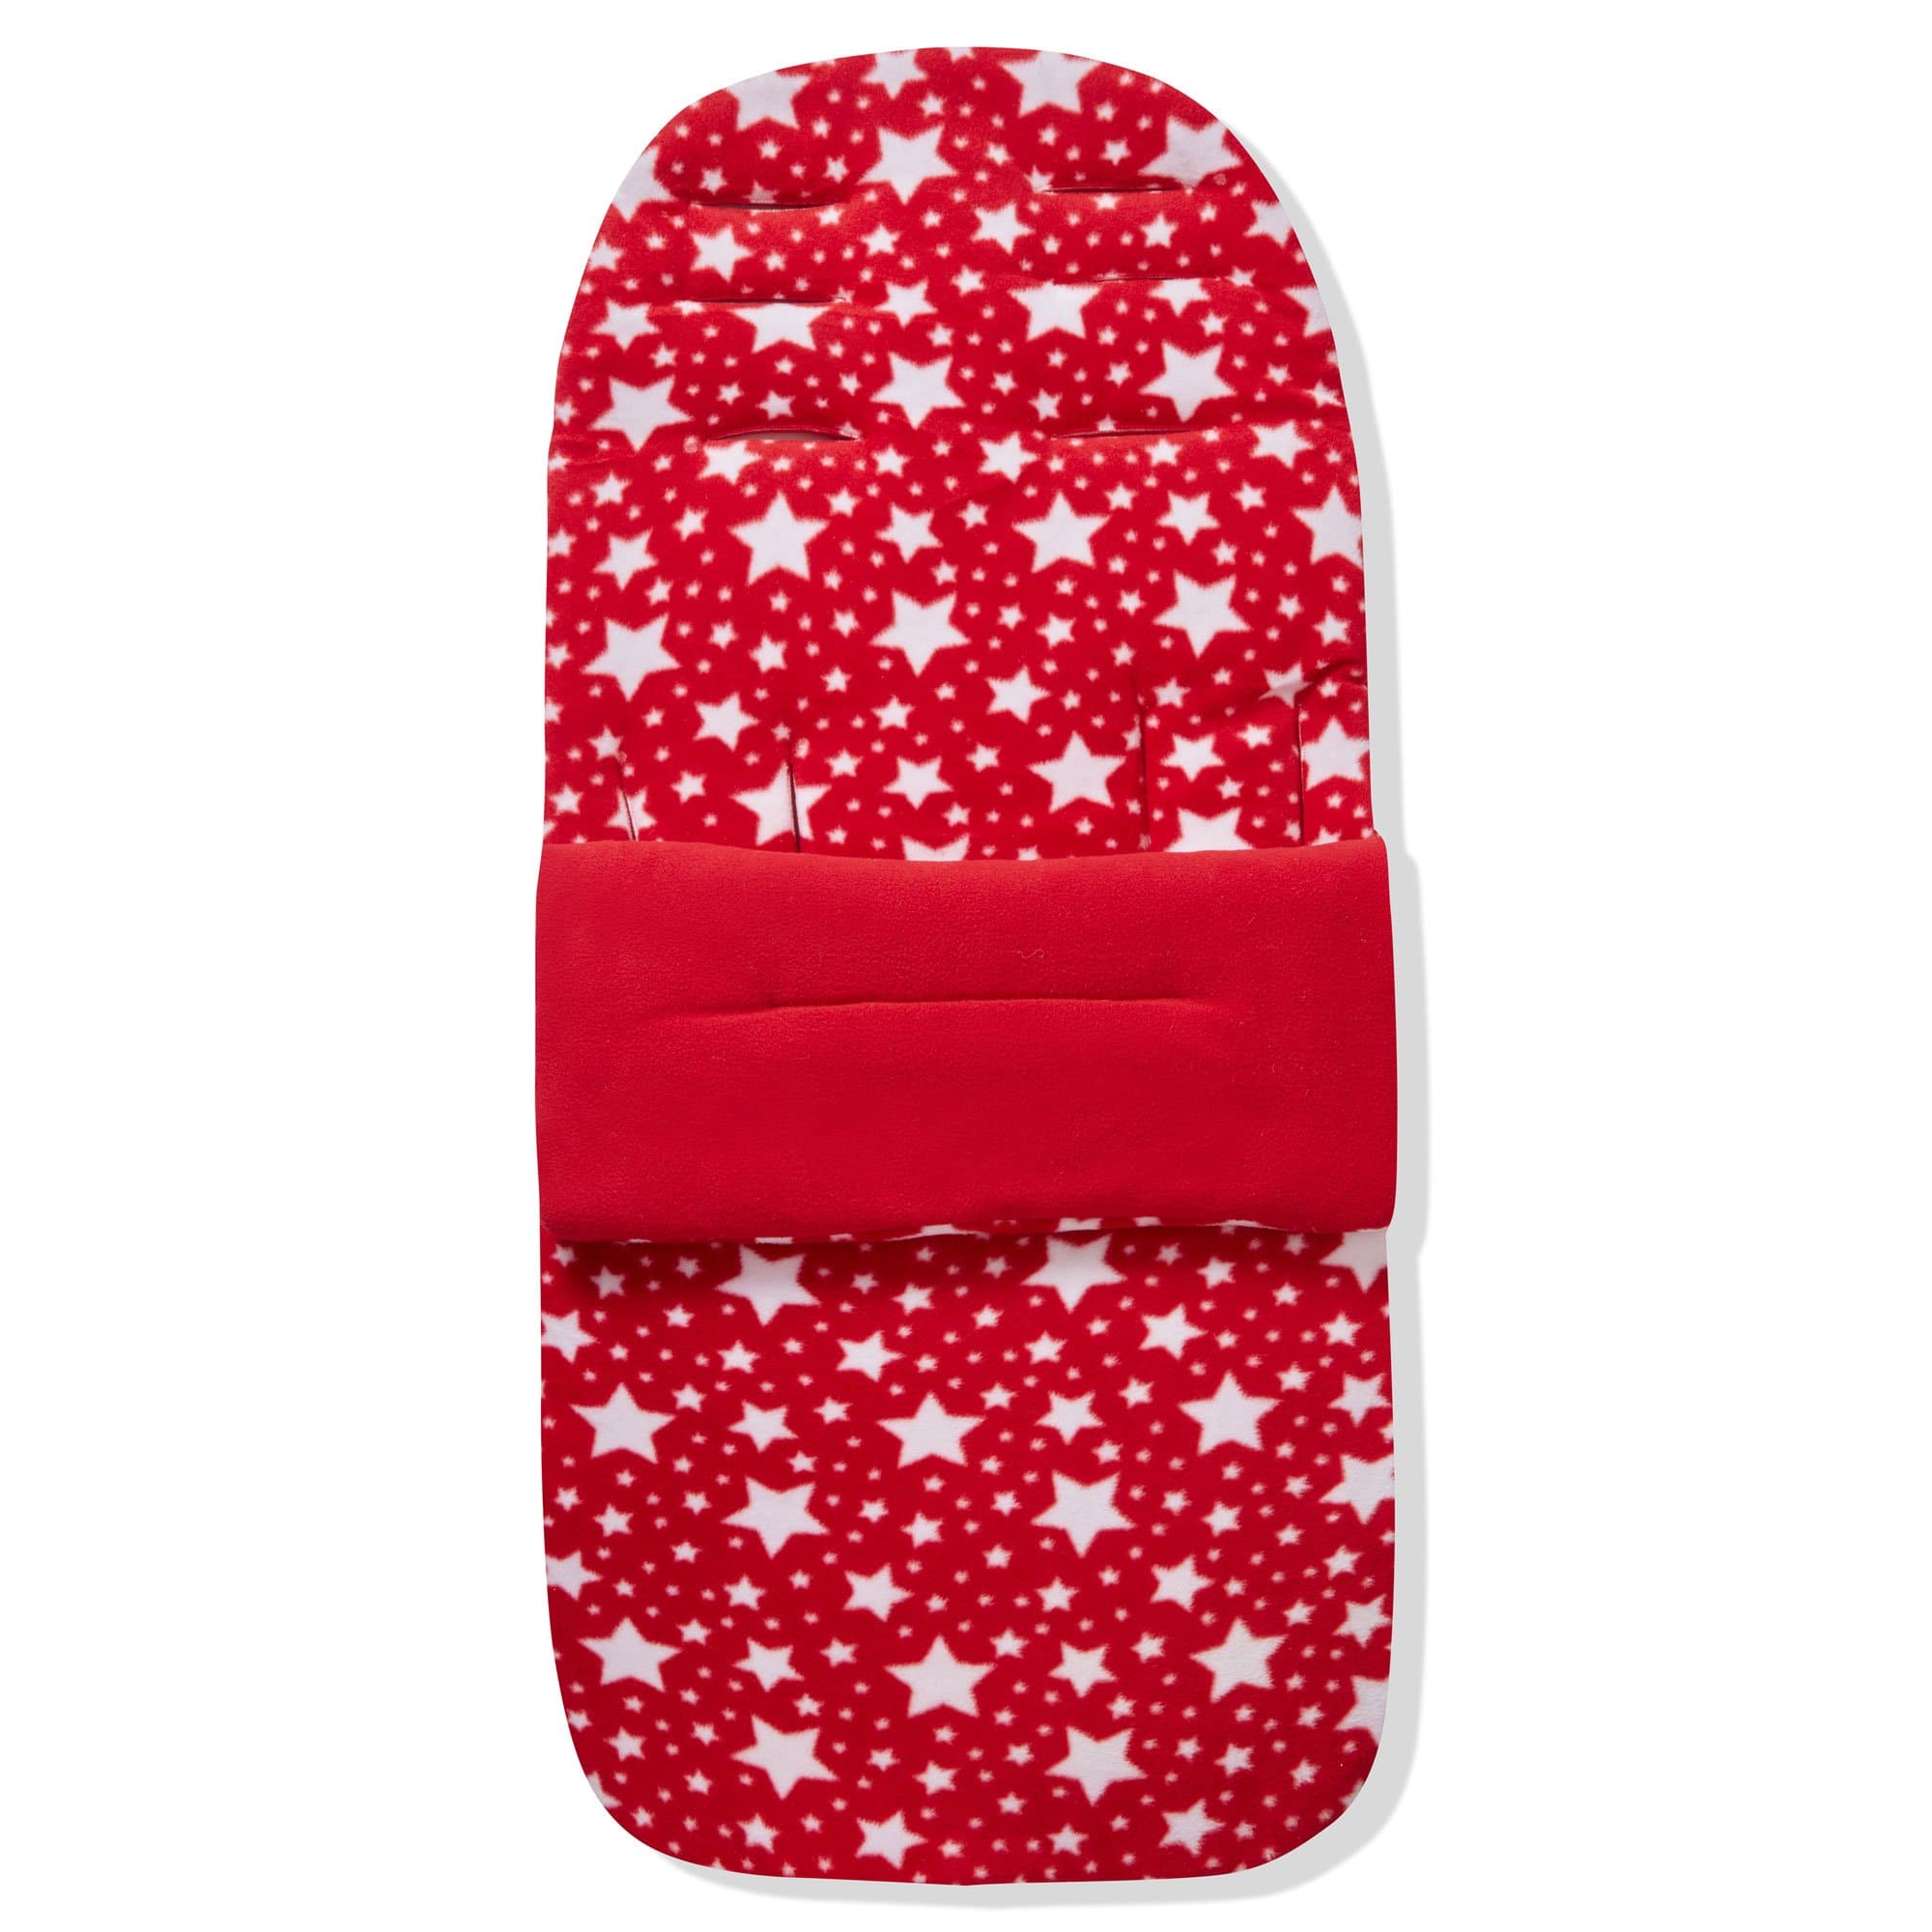 Fleece Footmuff / Cosy Toes Compatible With Brevi - For Your Little One